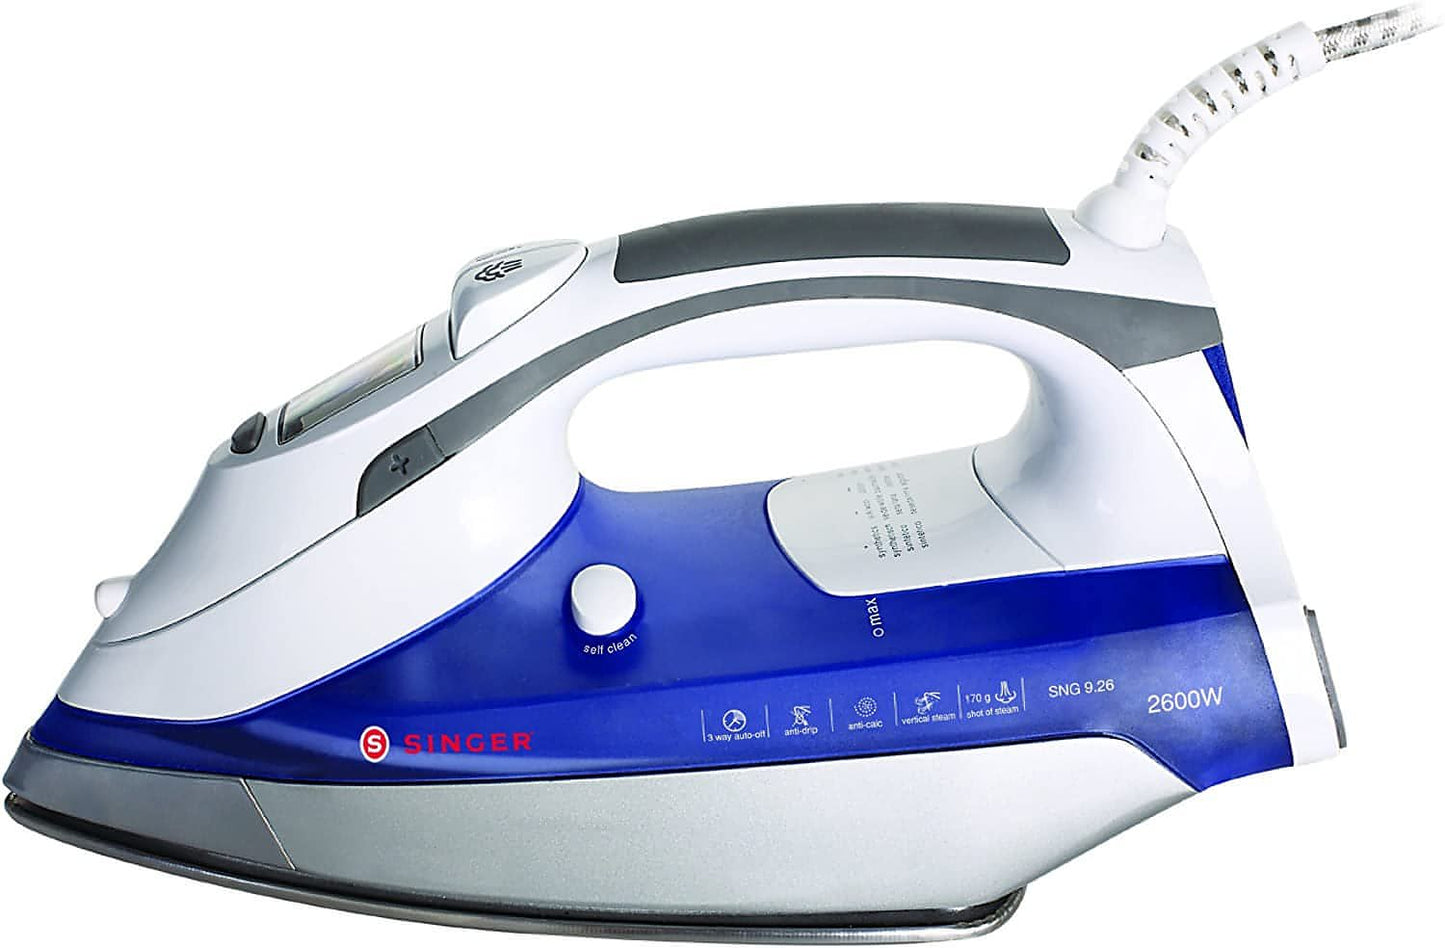 Singer 9.26 Expert Finish Steam Iron for general ironing and quilting